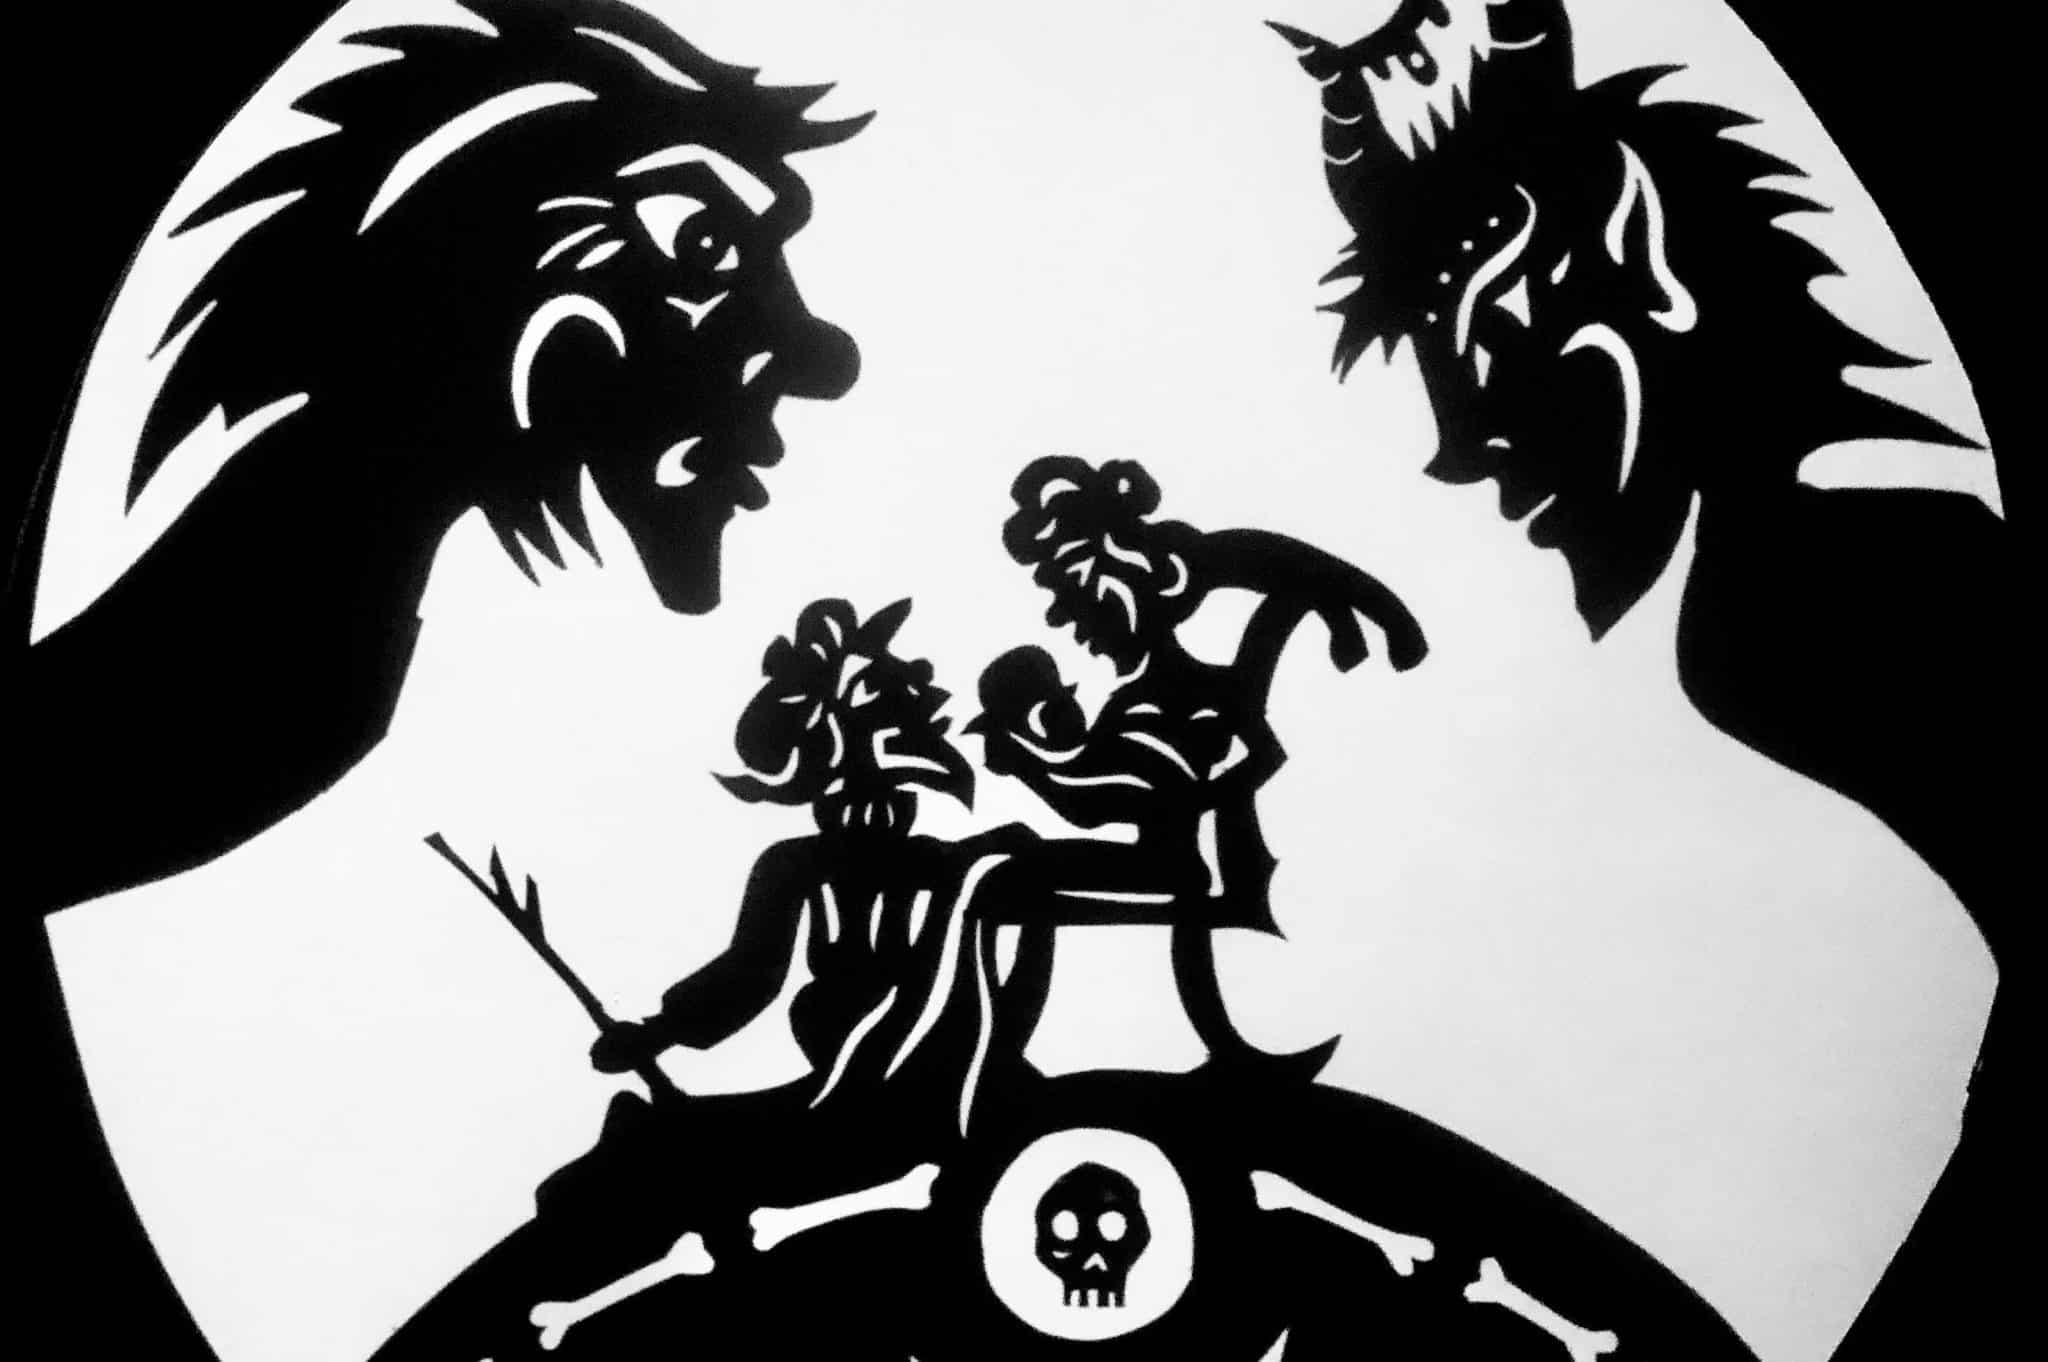 A scene from "The Changeling" performed through shadow puppets.